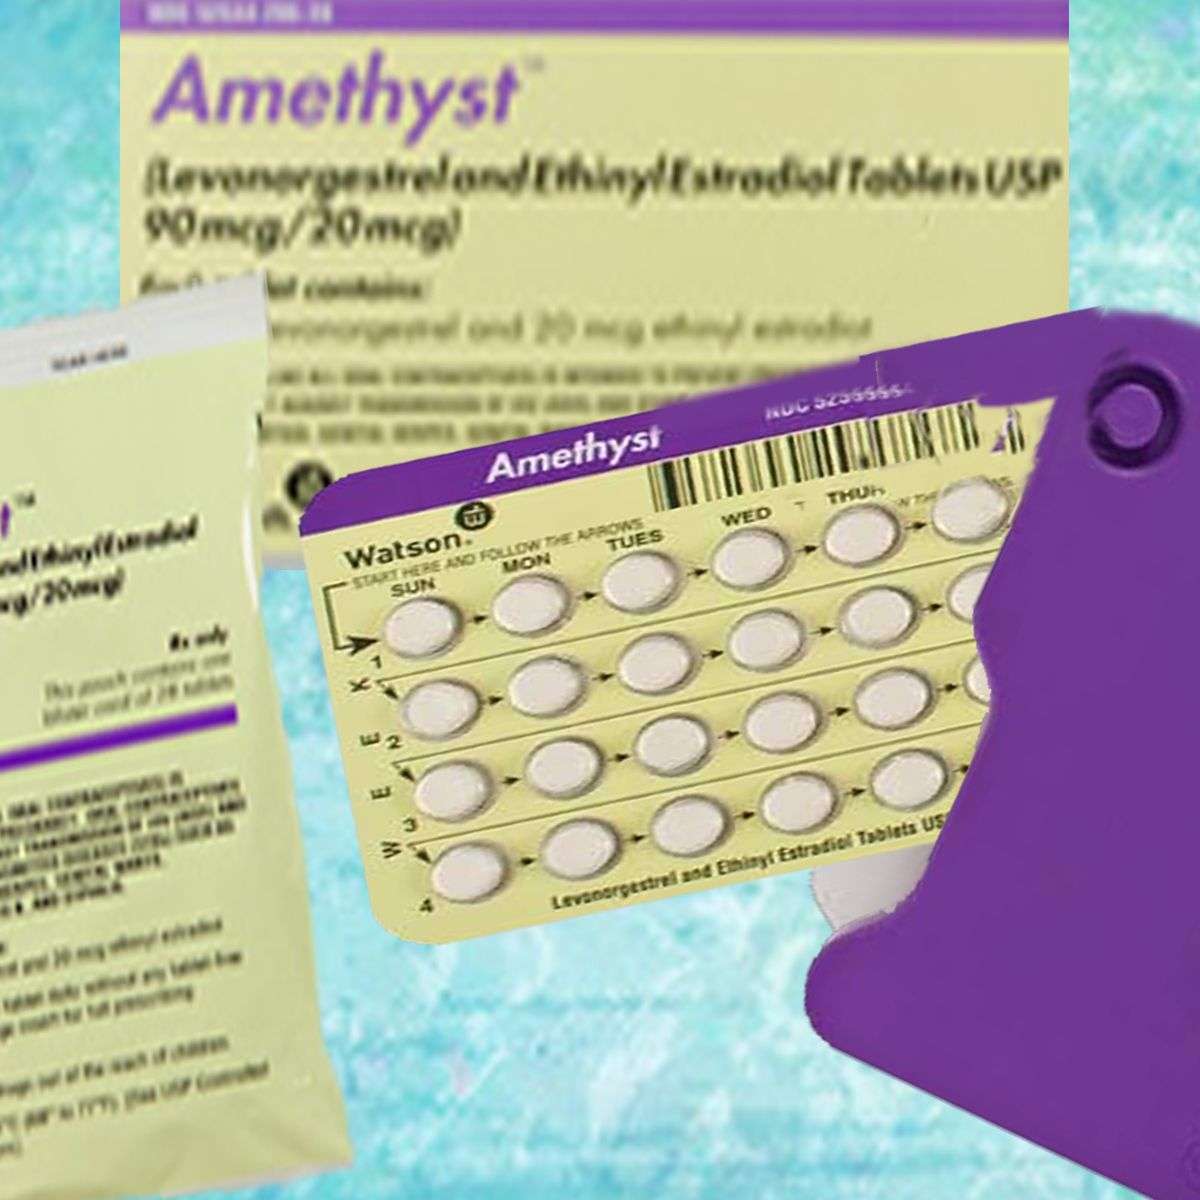 Family Inside: Low Hormone Birth Control Pills Brands